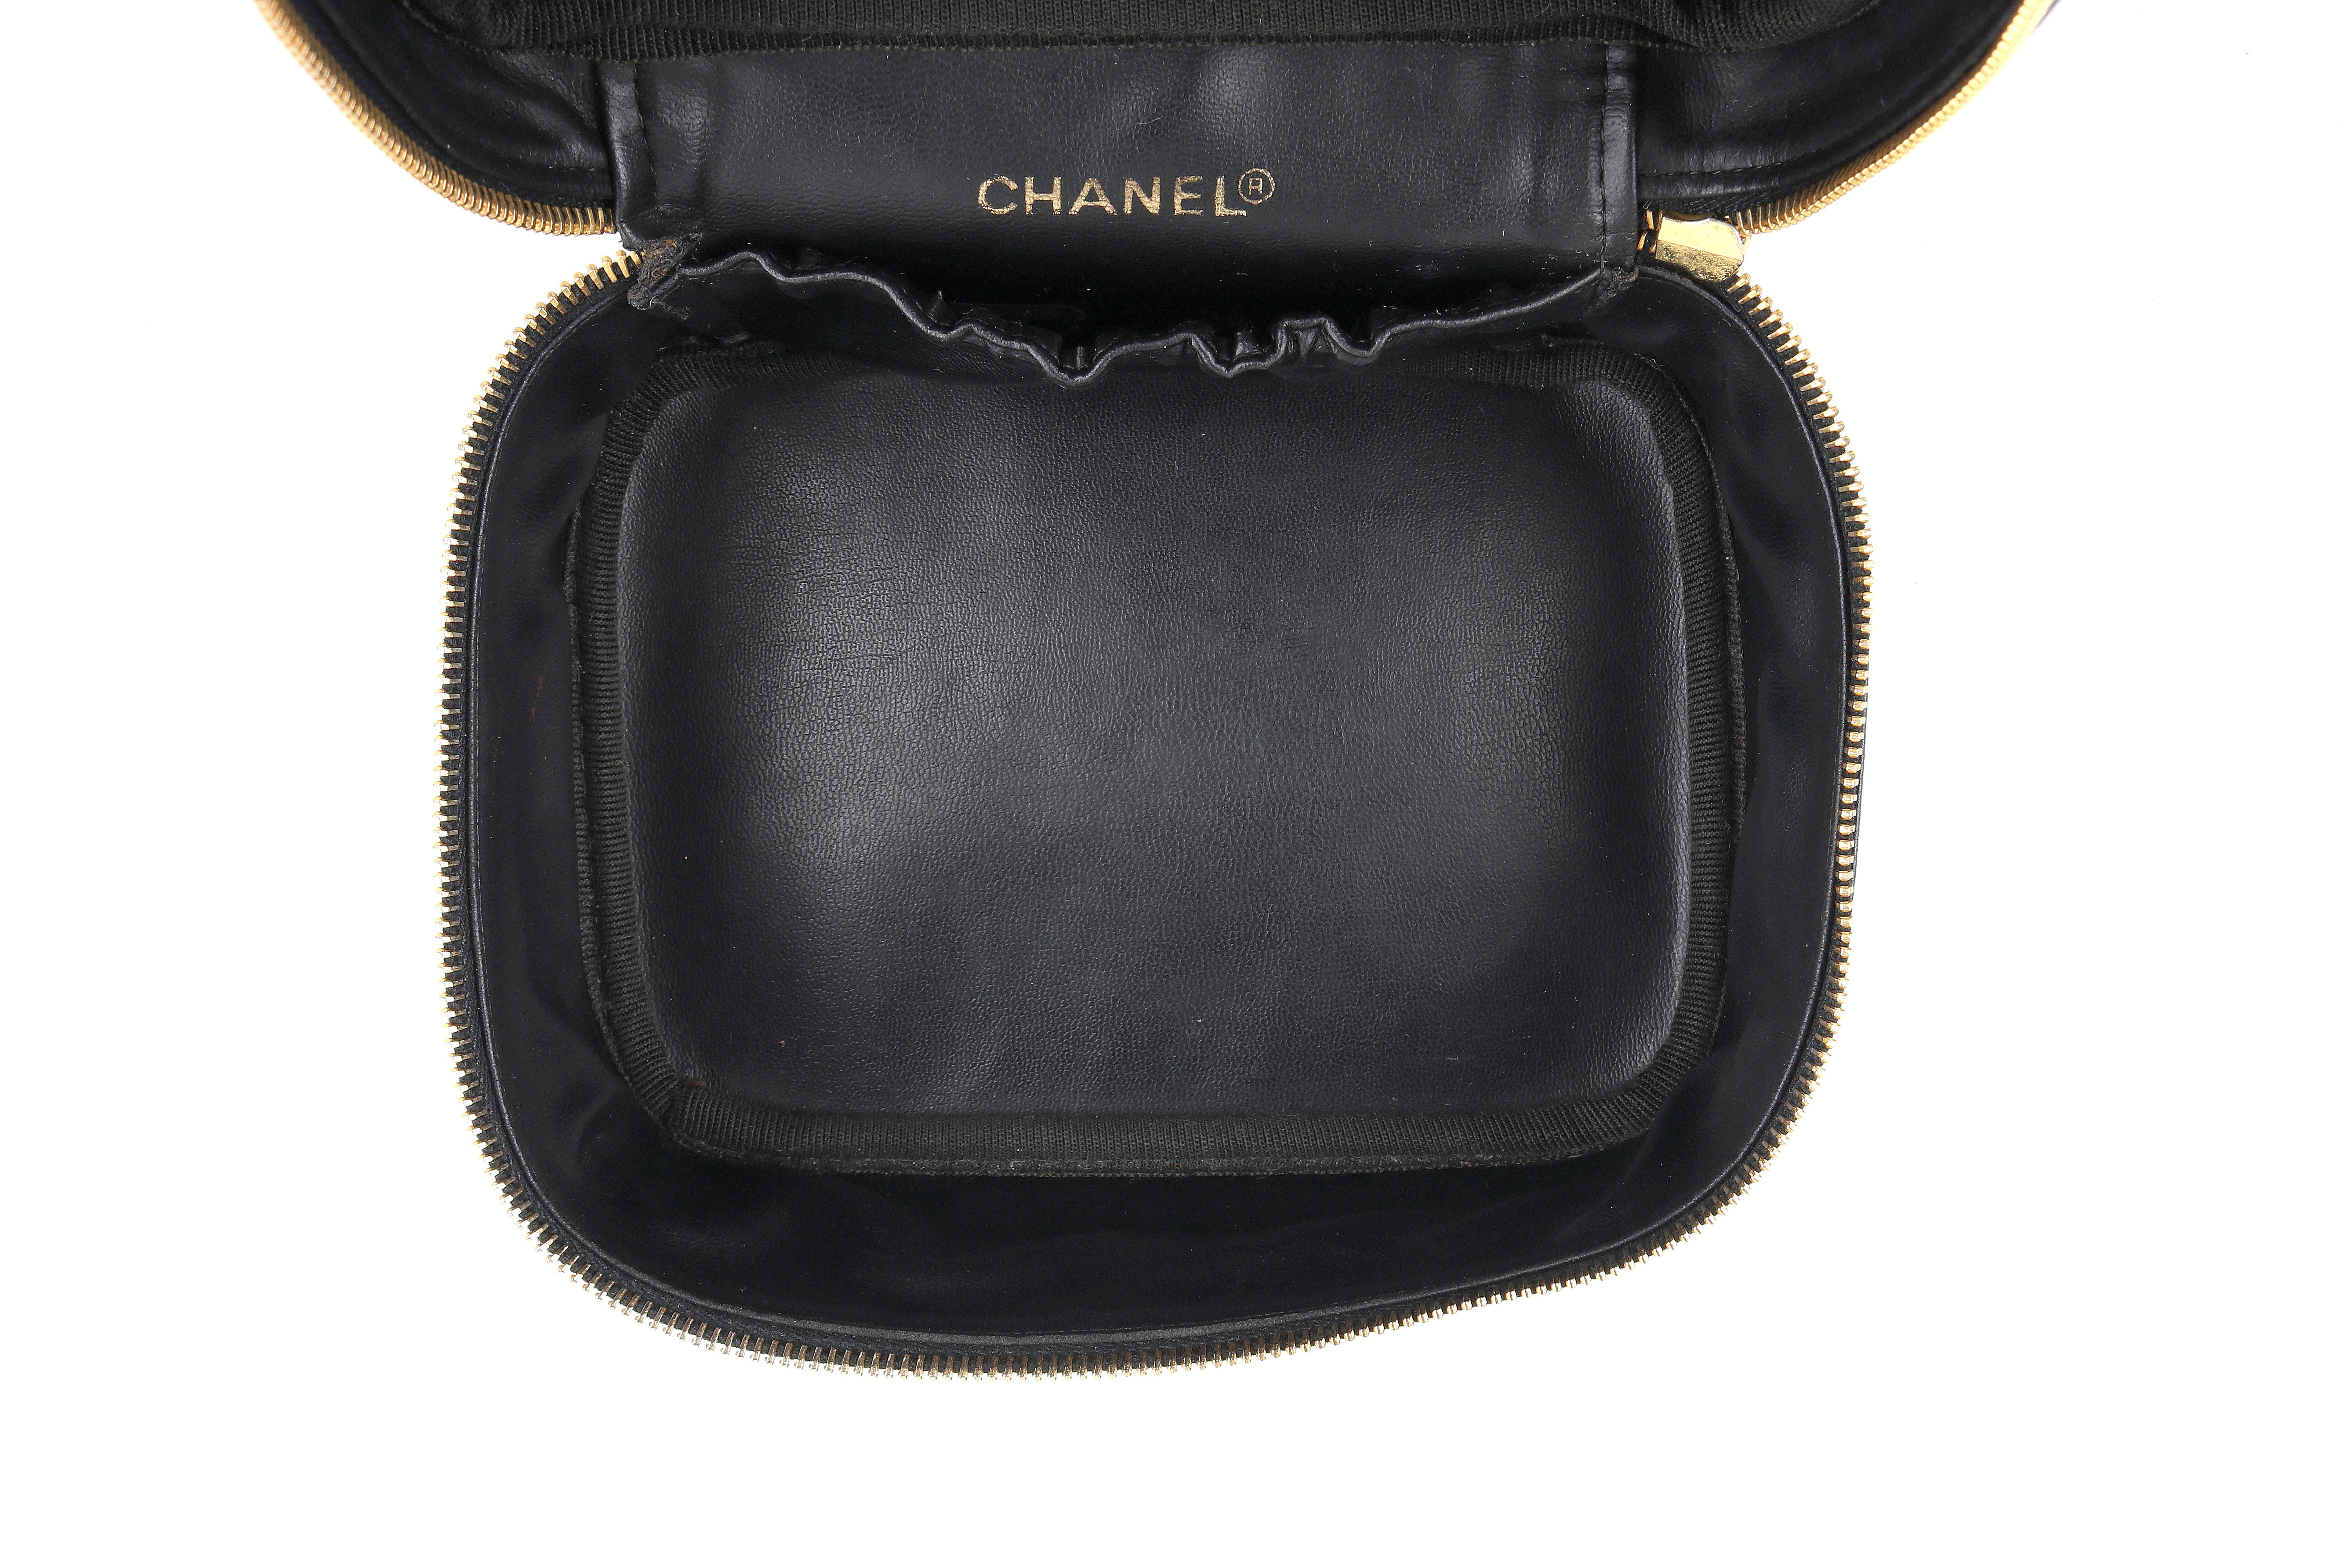 CHANEL c.1990's Black Leather Quilted Zip Around Cosmetic Bag Travel Case 7